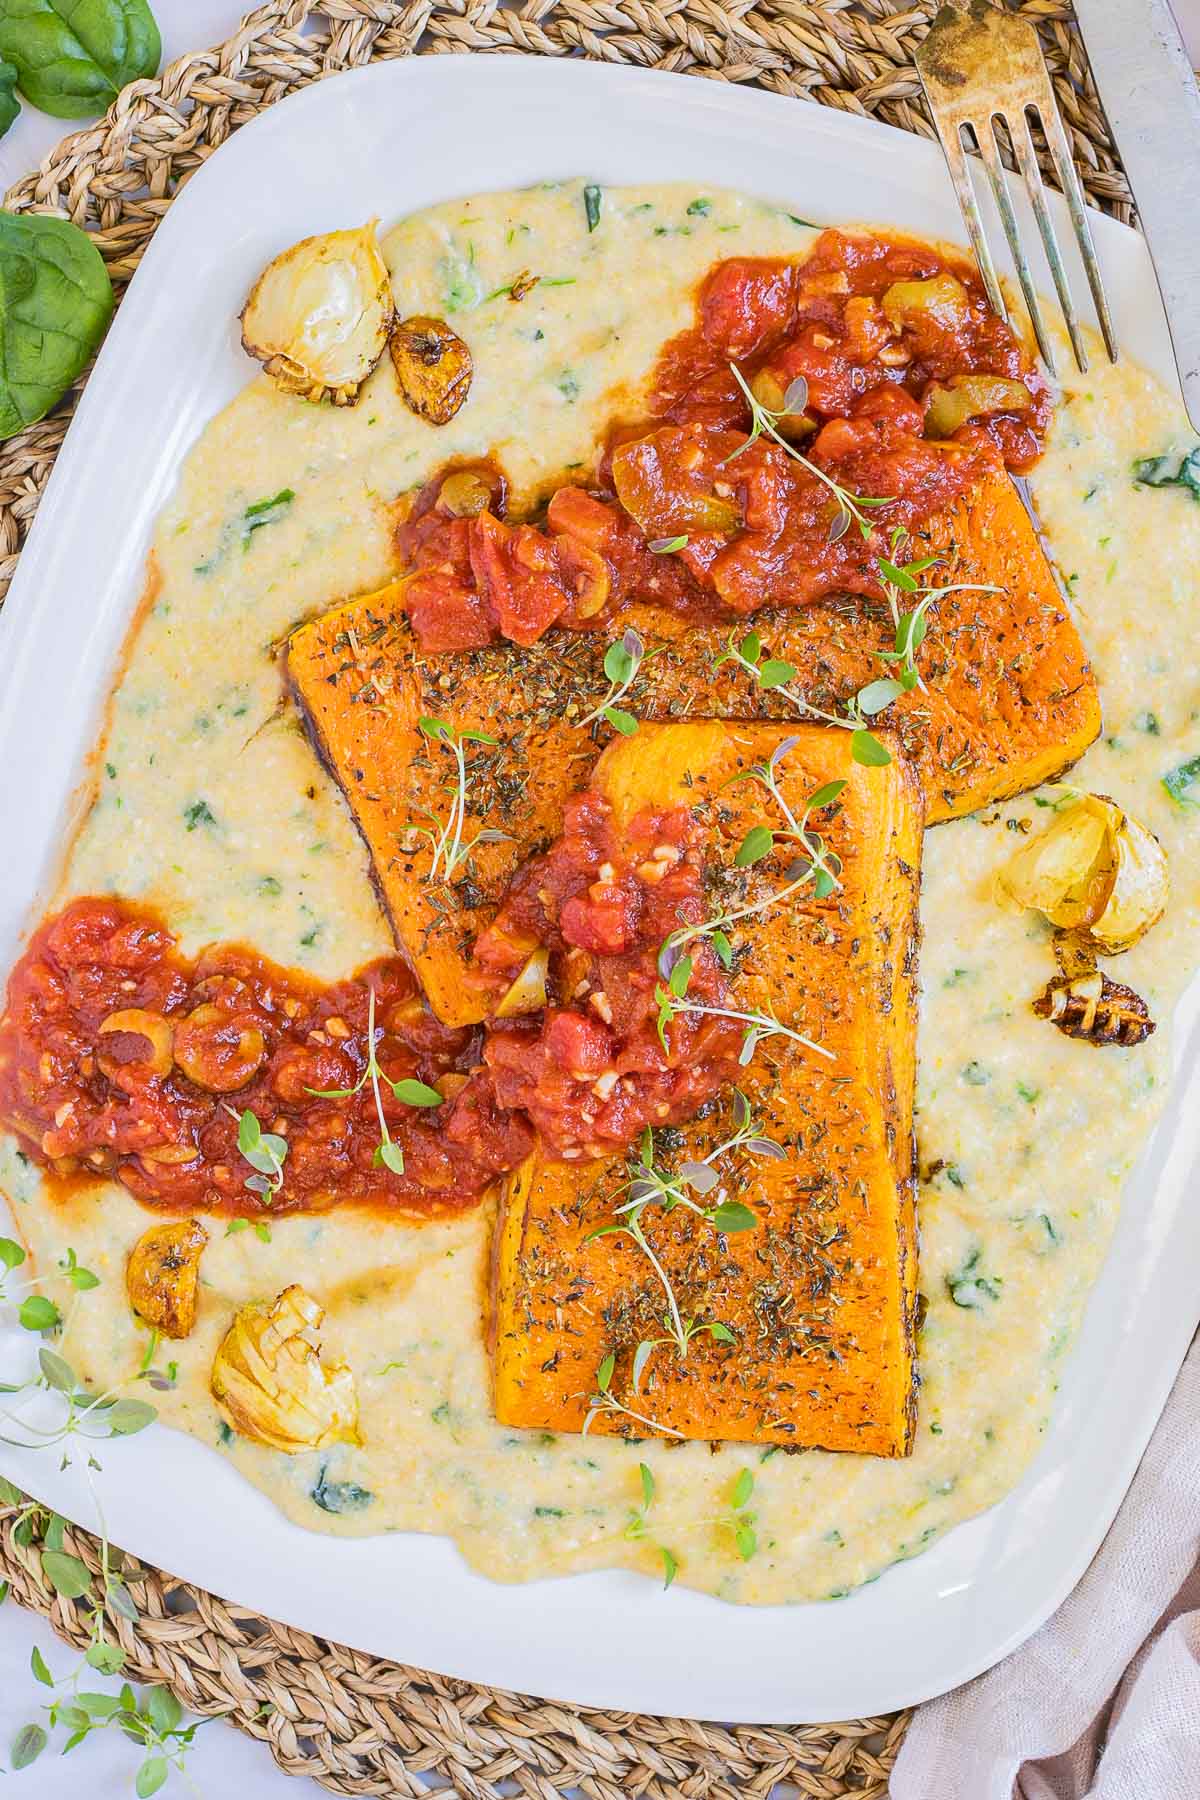 Large white plate with creamy polenta and large butternut squash slices drizzled with red tomato sauce and topped with fresh herbs.